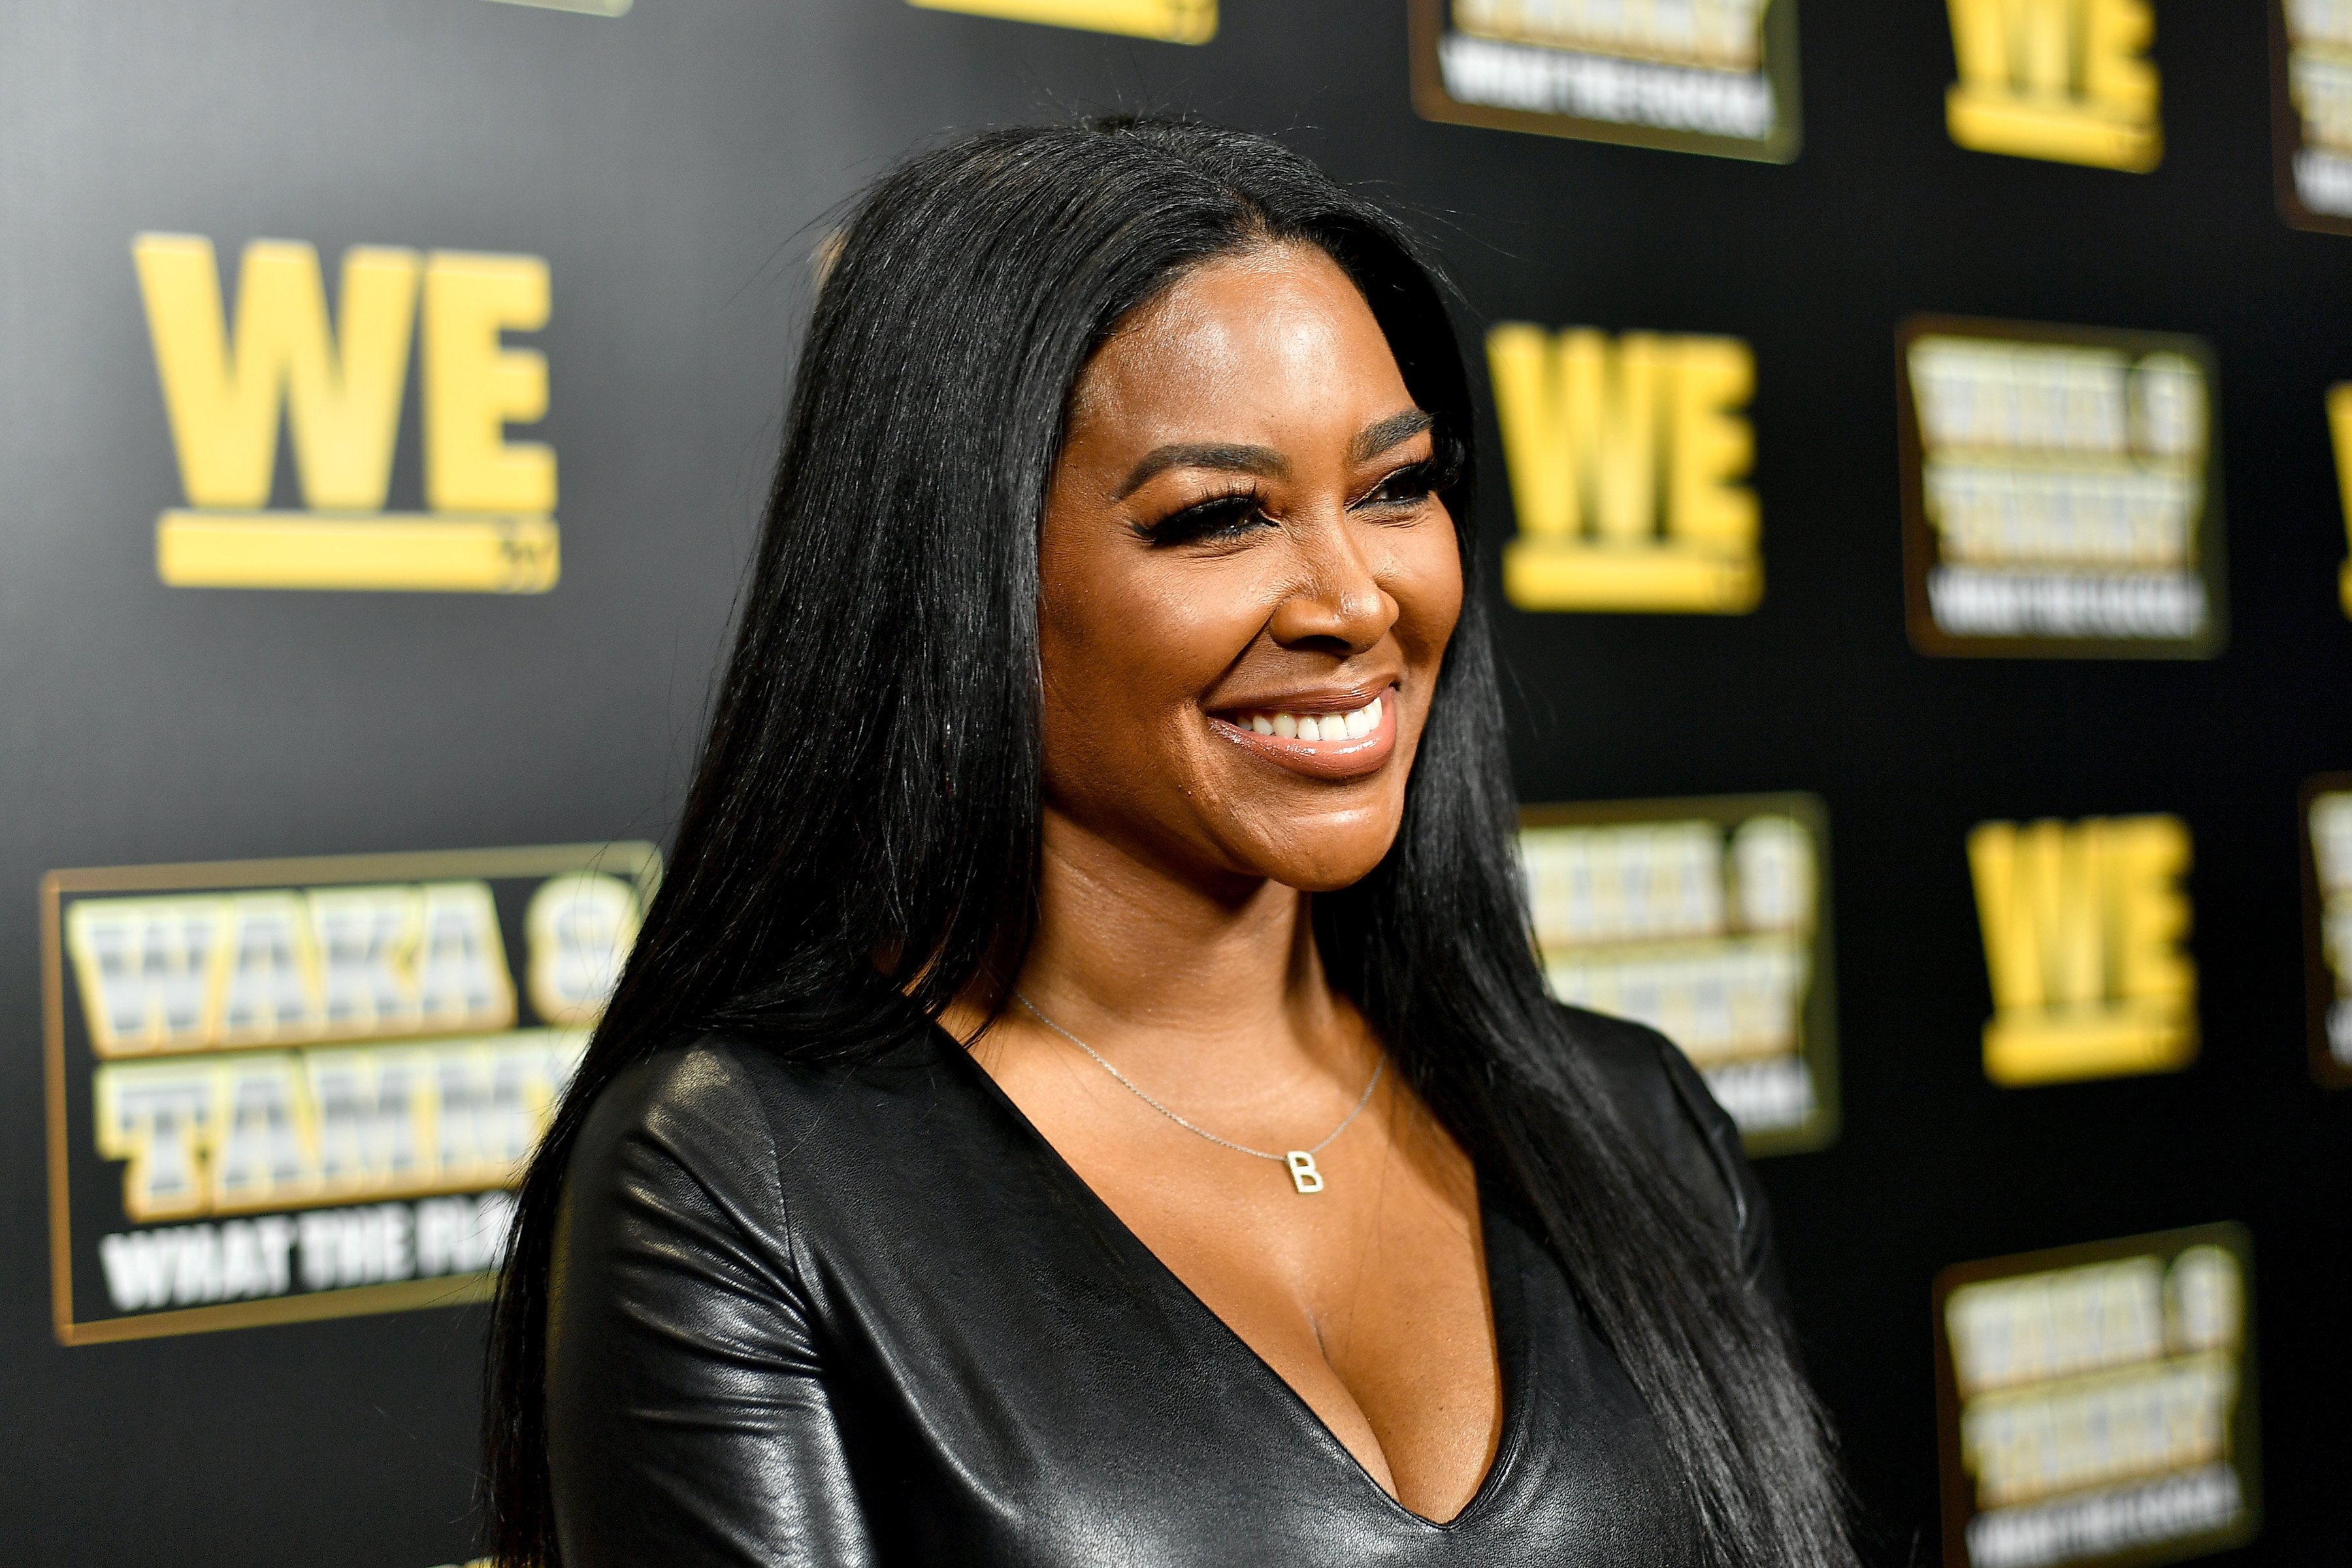 Kenya Moore at the premiere of "Waka & Tammy: What The Flocka" at Republic on March 10, 2020 in Atlanta, Georgia.| Source: Getty Images